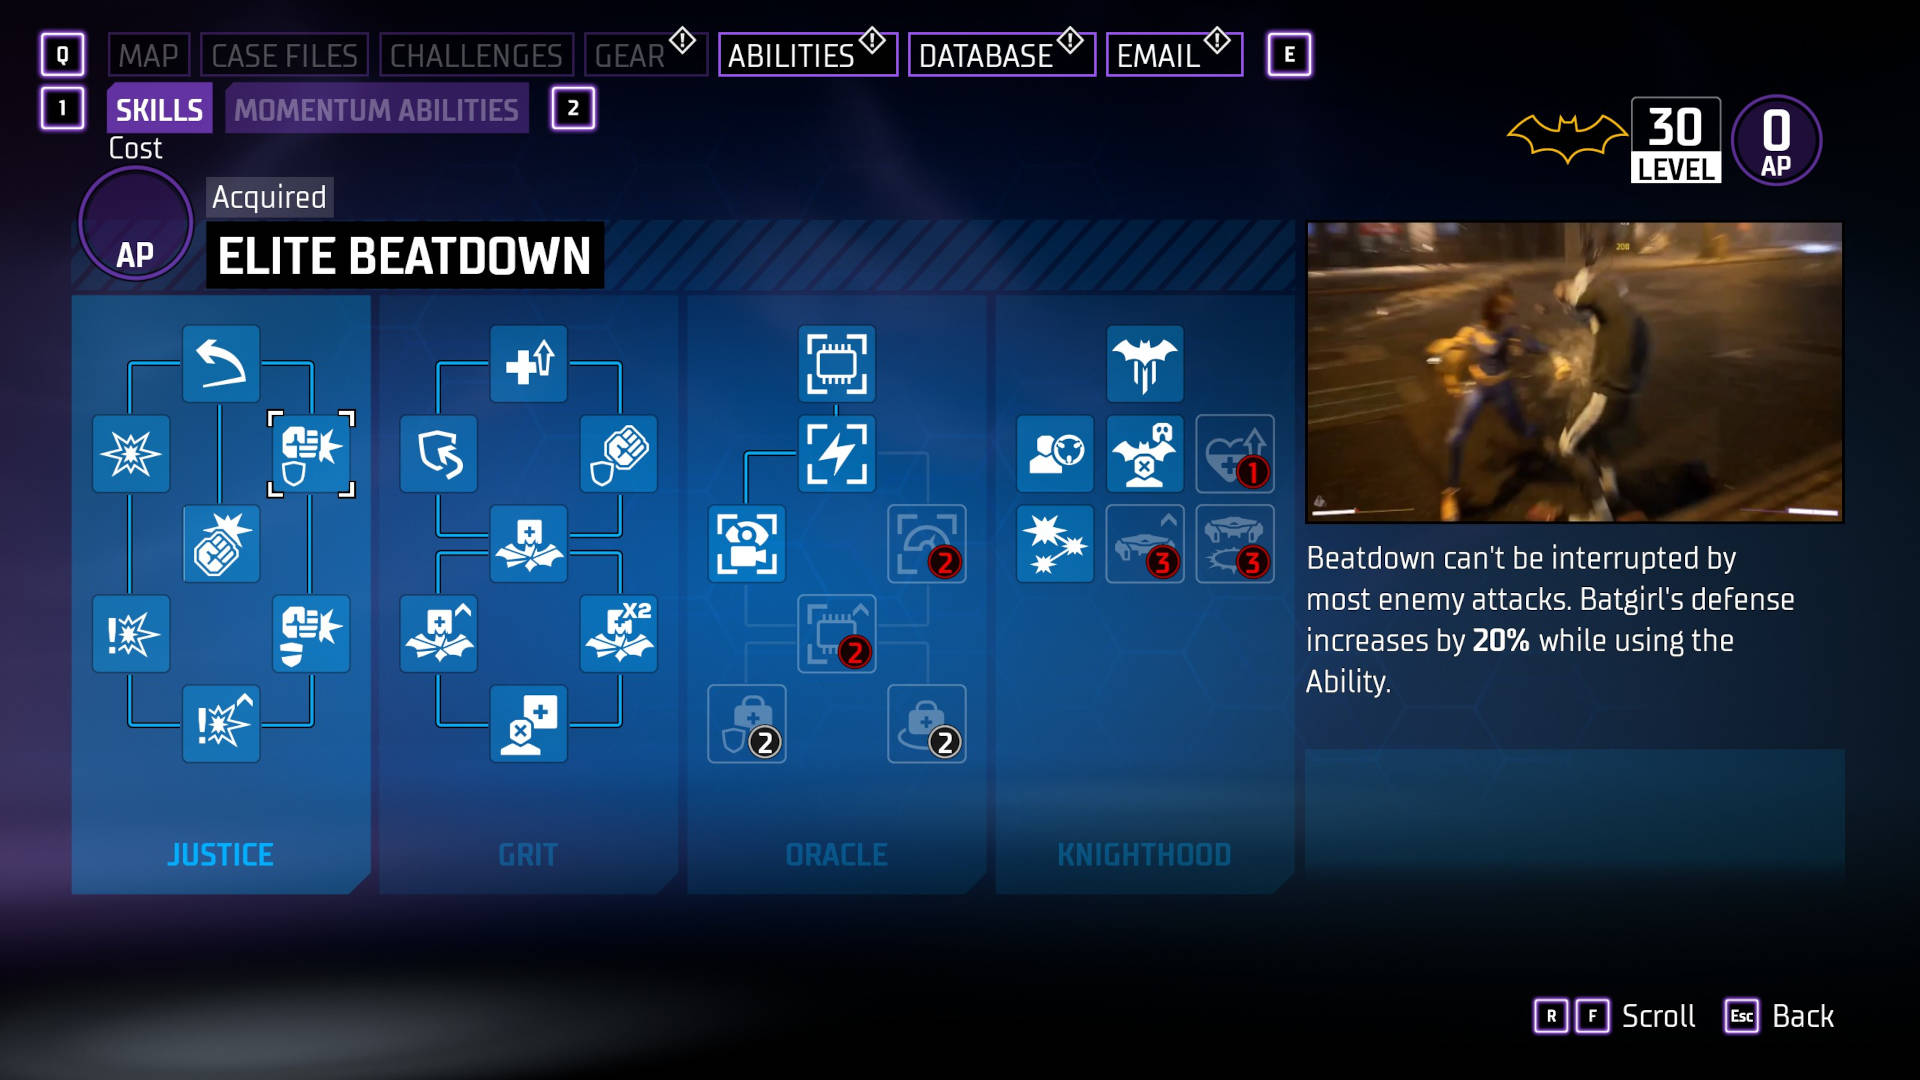 Gotham Knights abilities: Batgirl's ability tree. A window on the right side of the screen shows the Exploding Elite Beatdown skill in action.